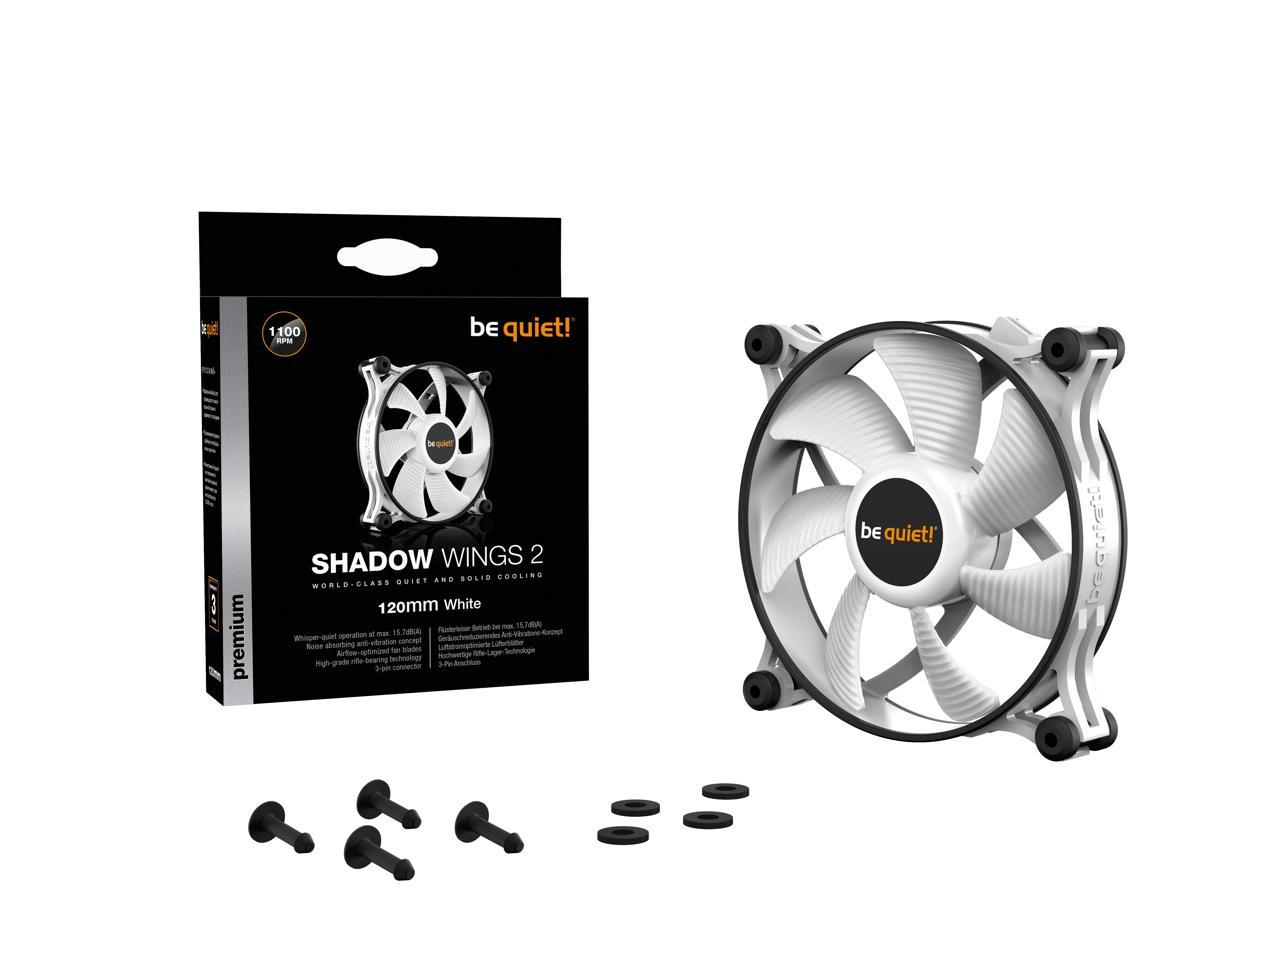 be quiet! Shadow Wings 2 120mm White, case fan, airflow-optimized fan blades, whisper-quiet operation and reliable cooling